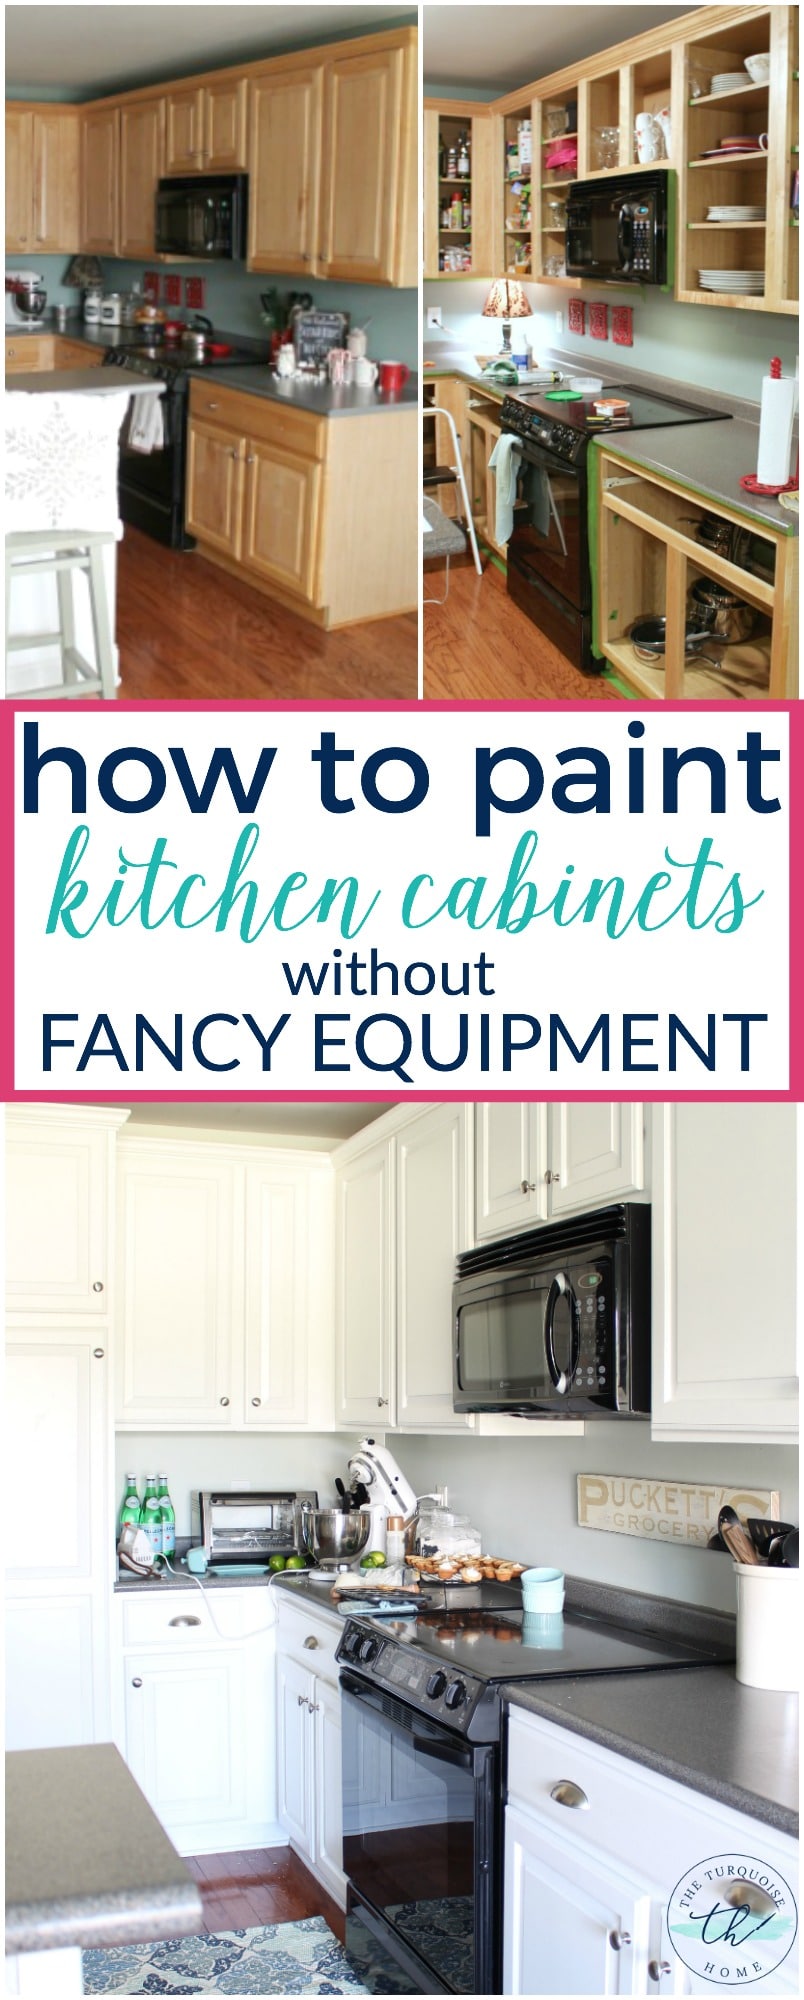 How to Paint Kitchen without Fancy Equipment